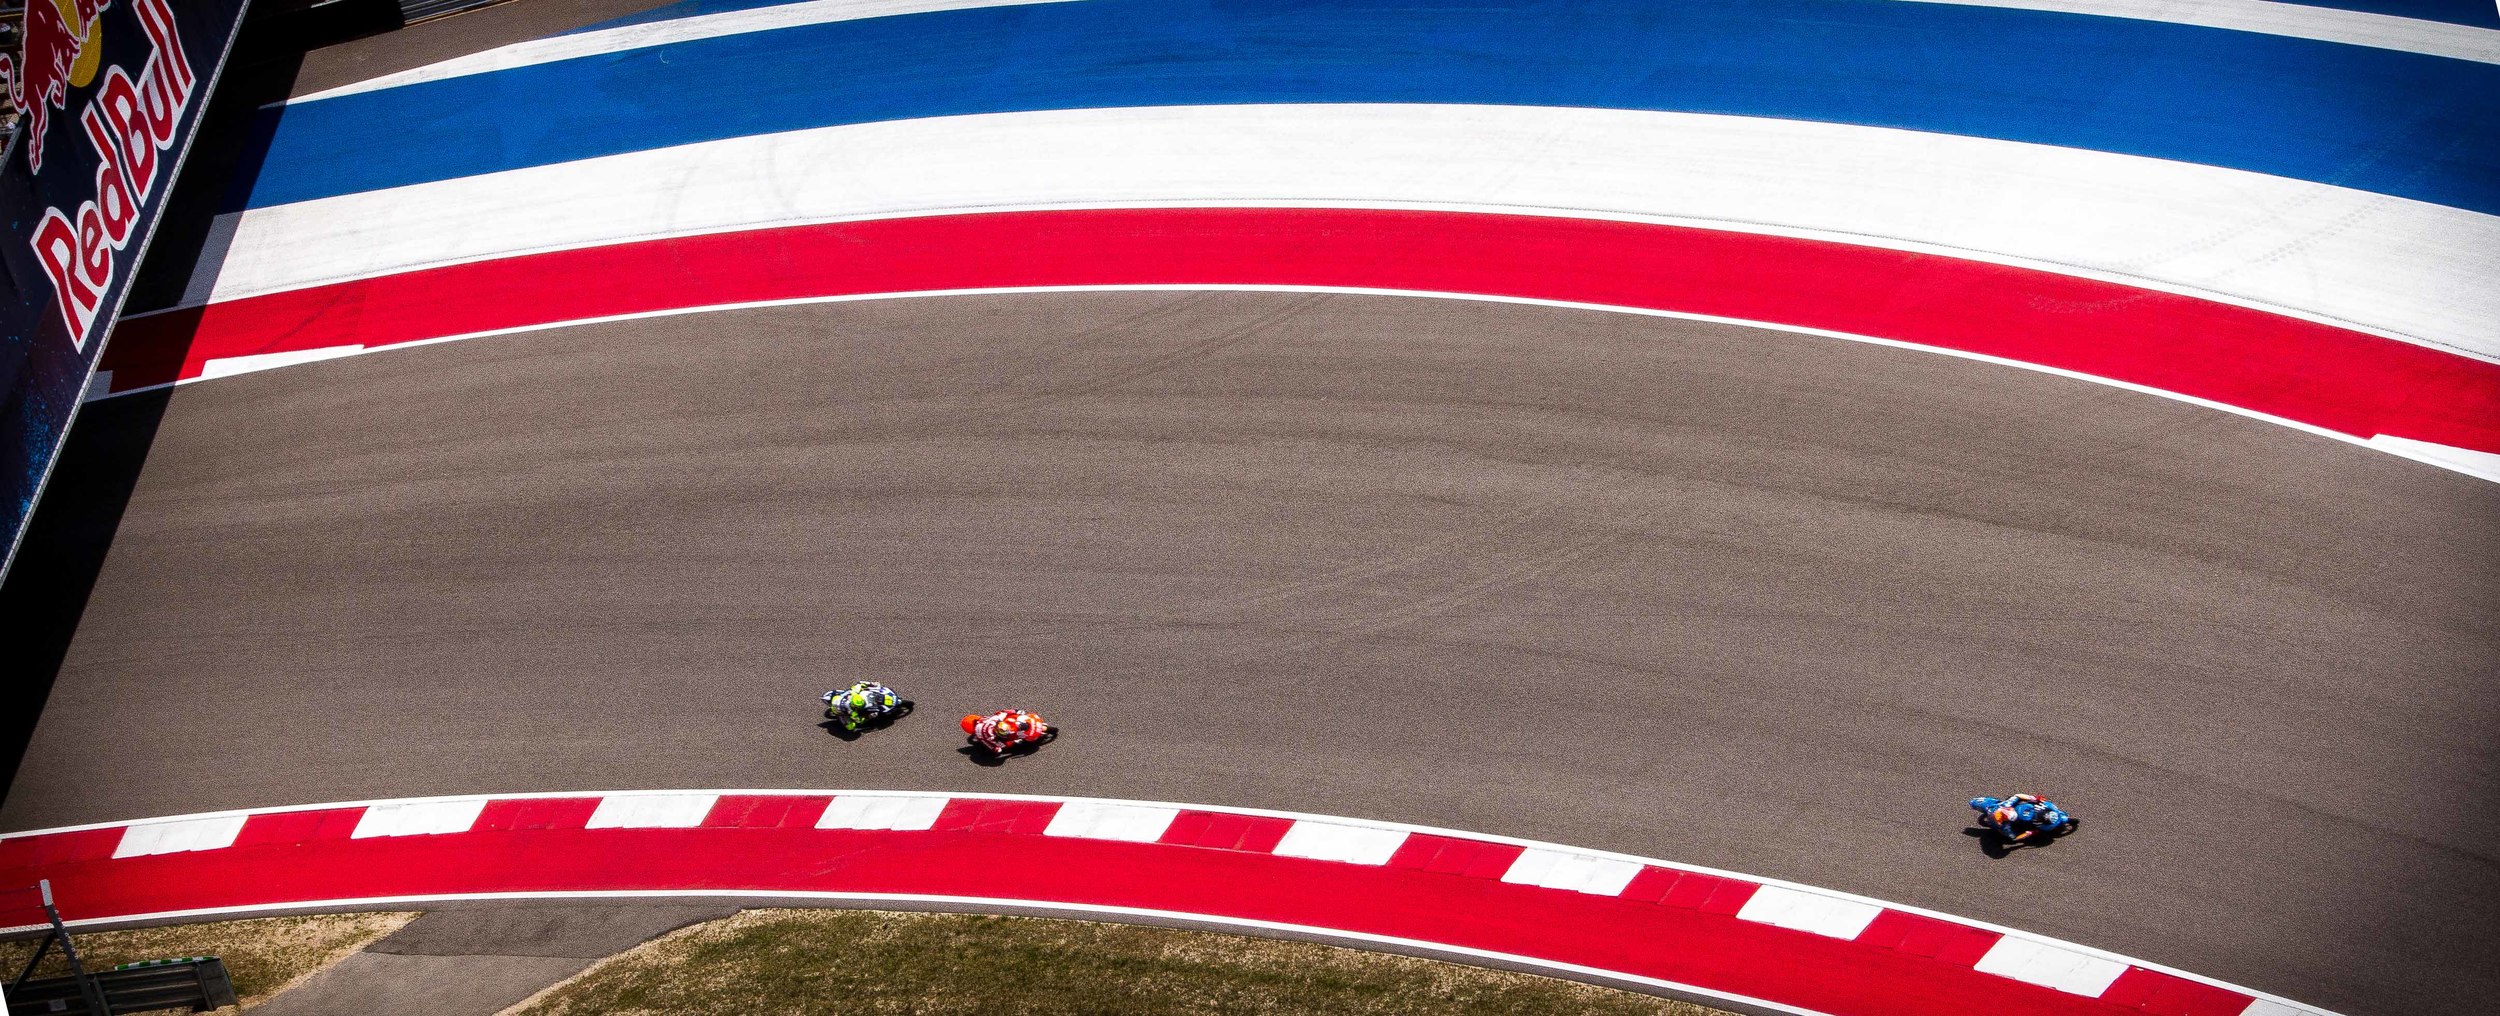  Here is a shot from the Observation tower looking down on riders at turn 16 of the Circuit of the Americas (COTA). 